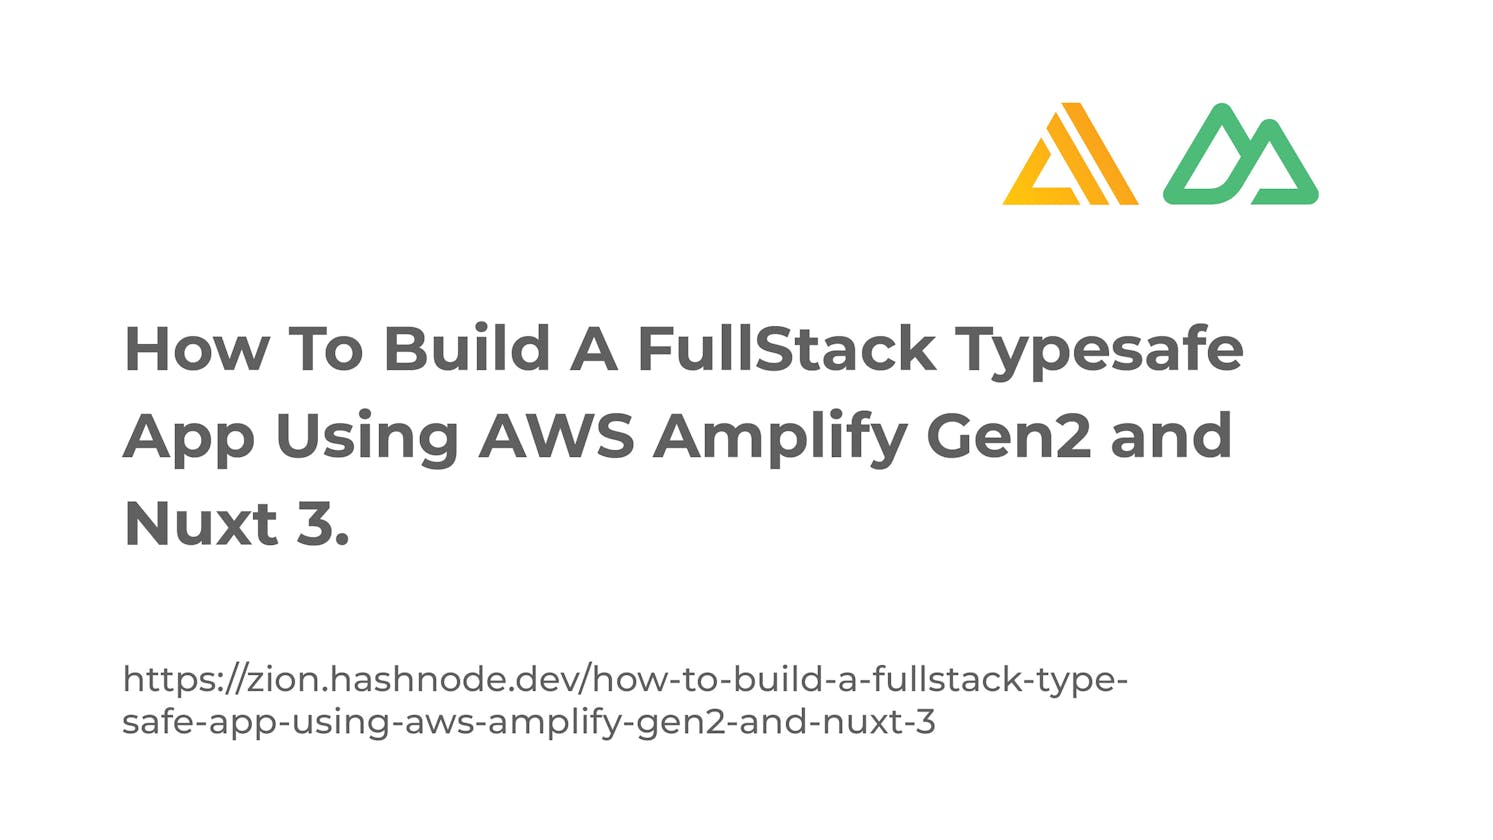 How To Build A FullStack Typesafe App Using AWS Amplify Gen2 and Nuxt 3.